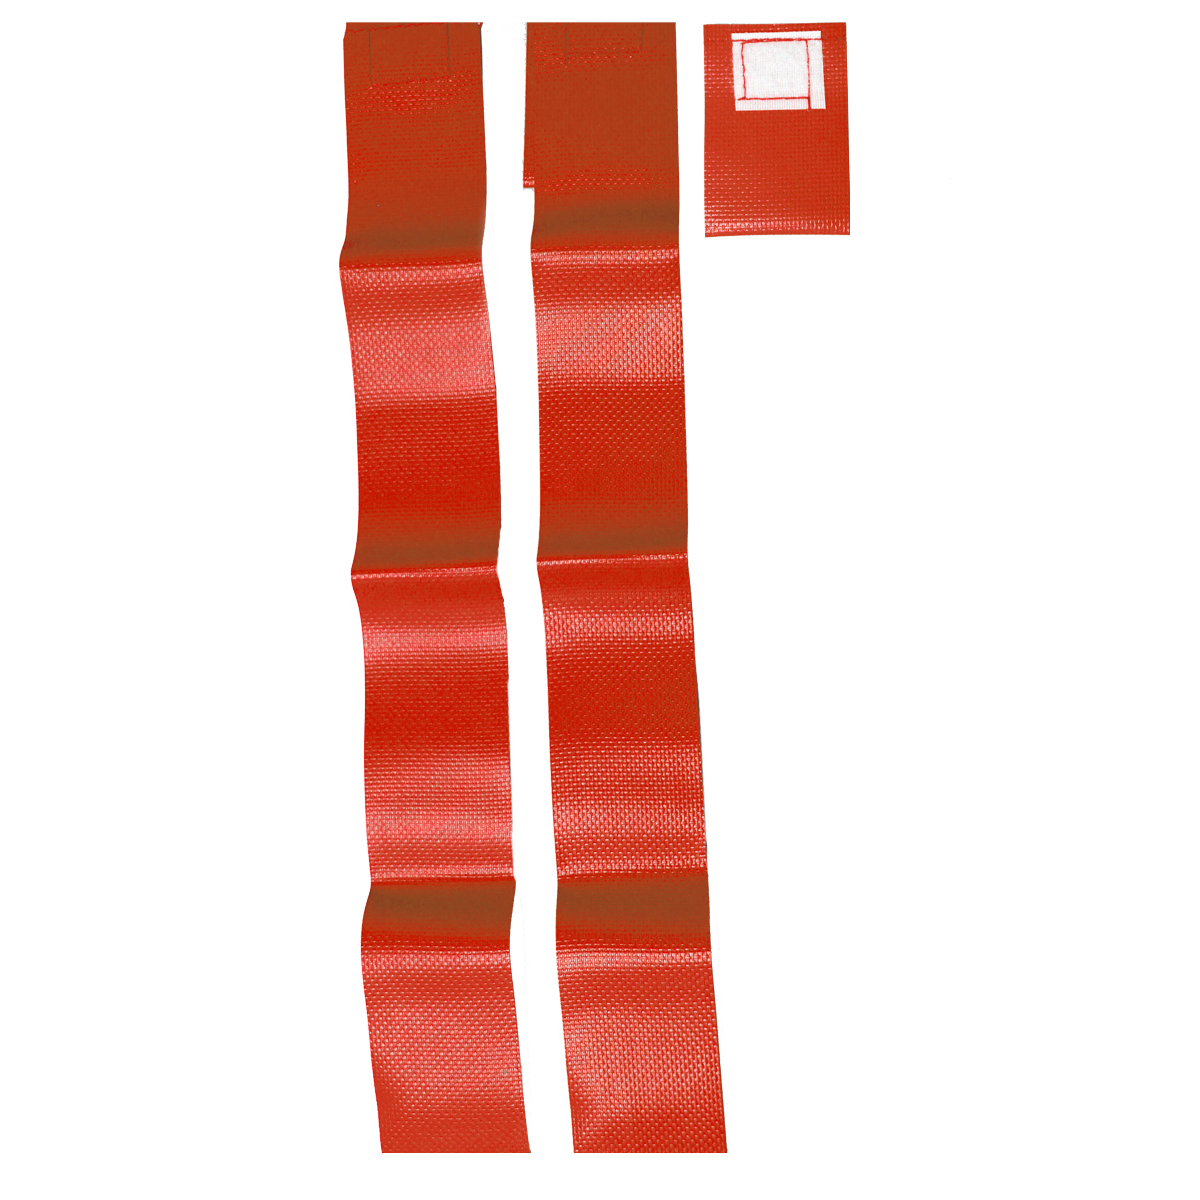 Standard Red Football Flags - set of 12 pair